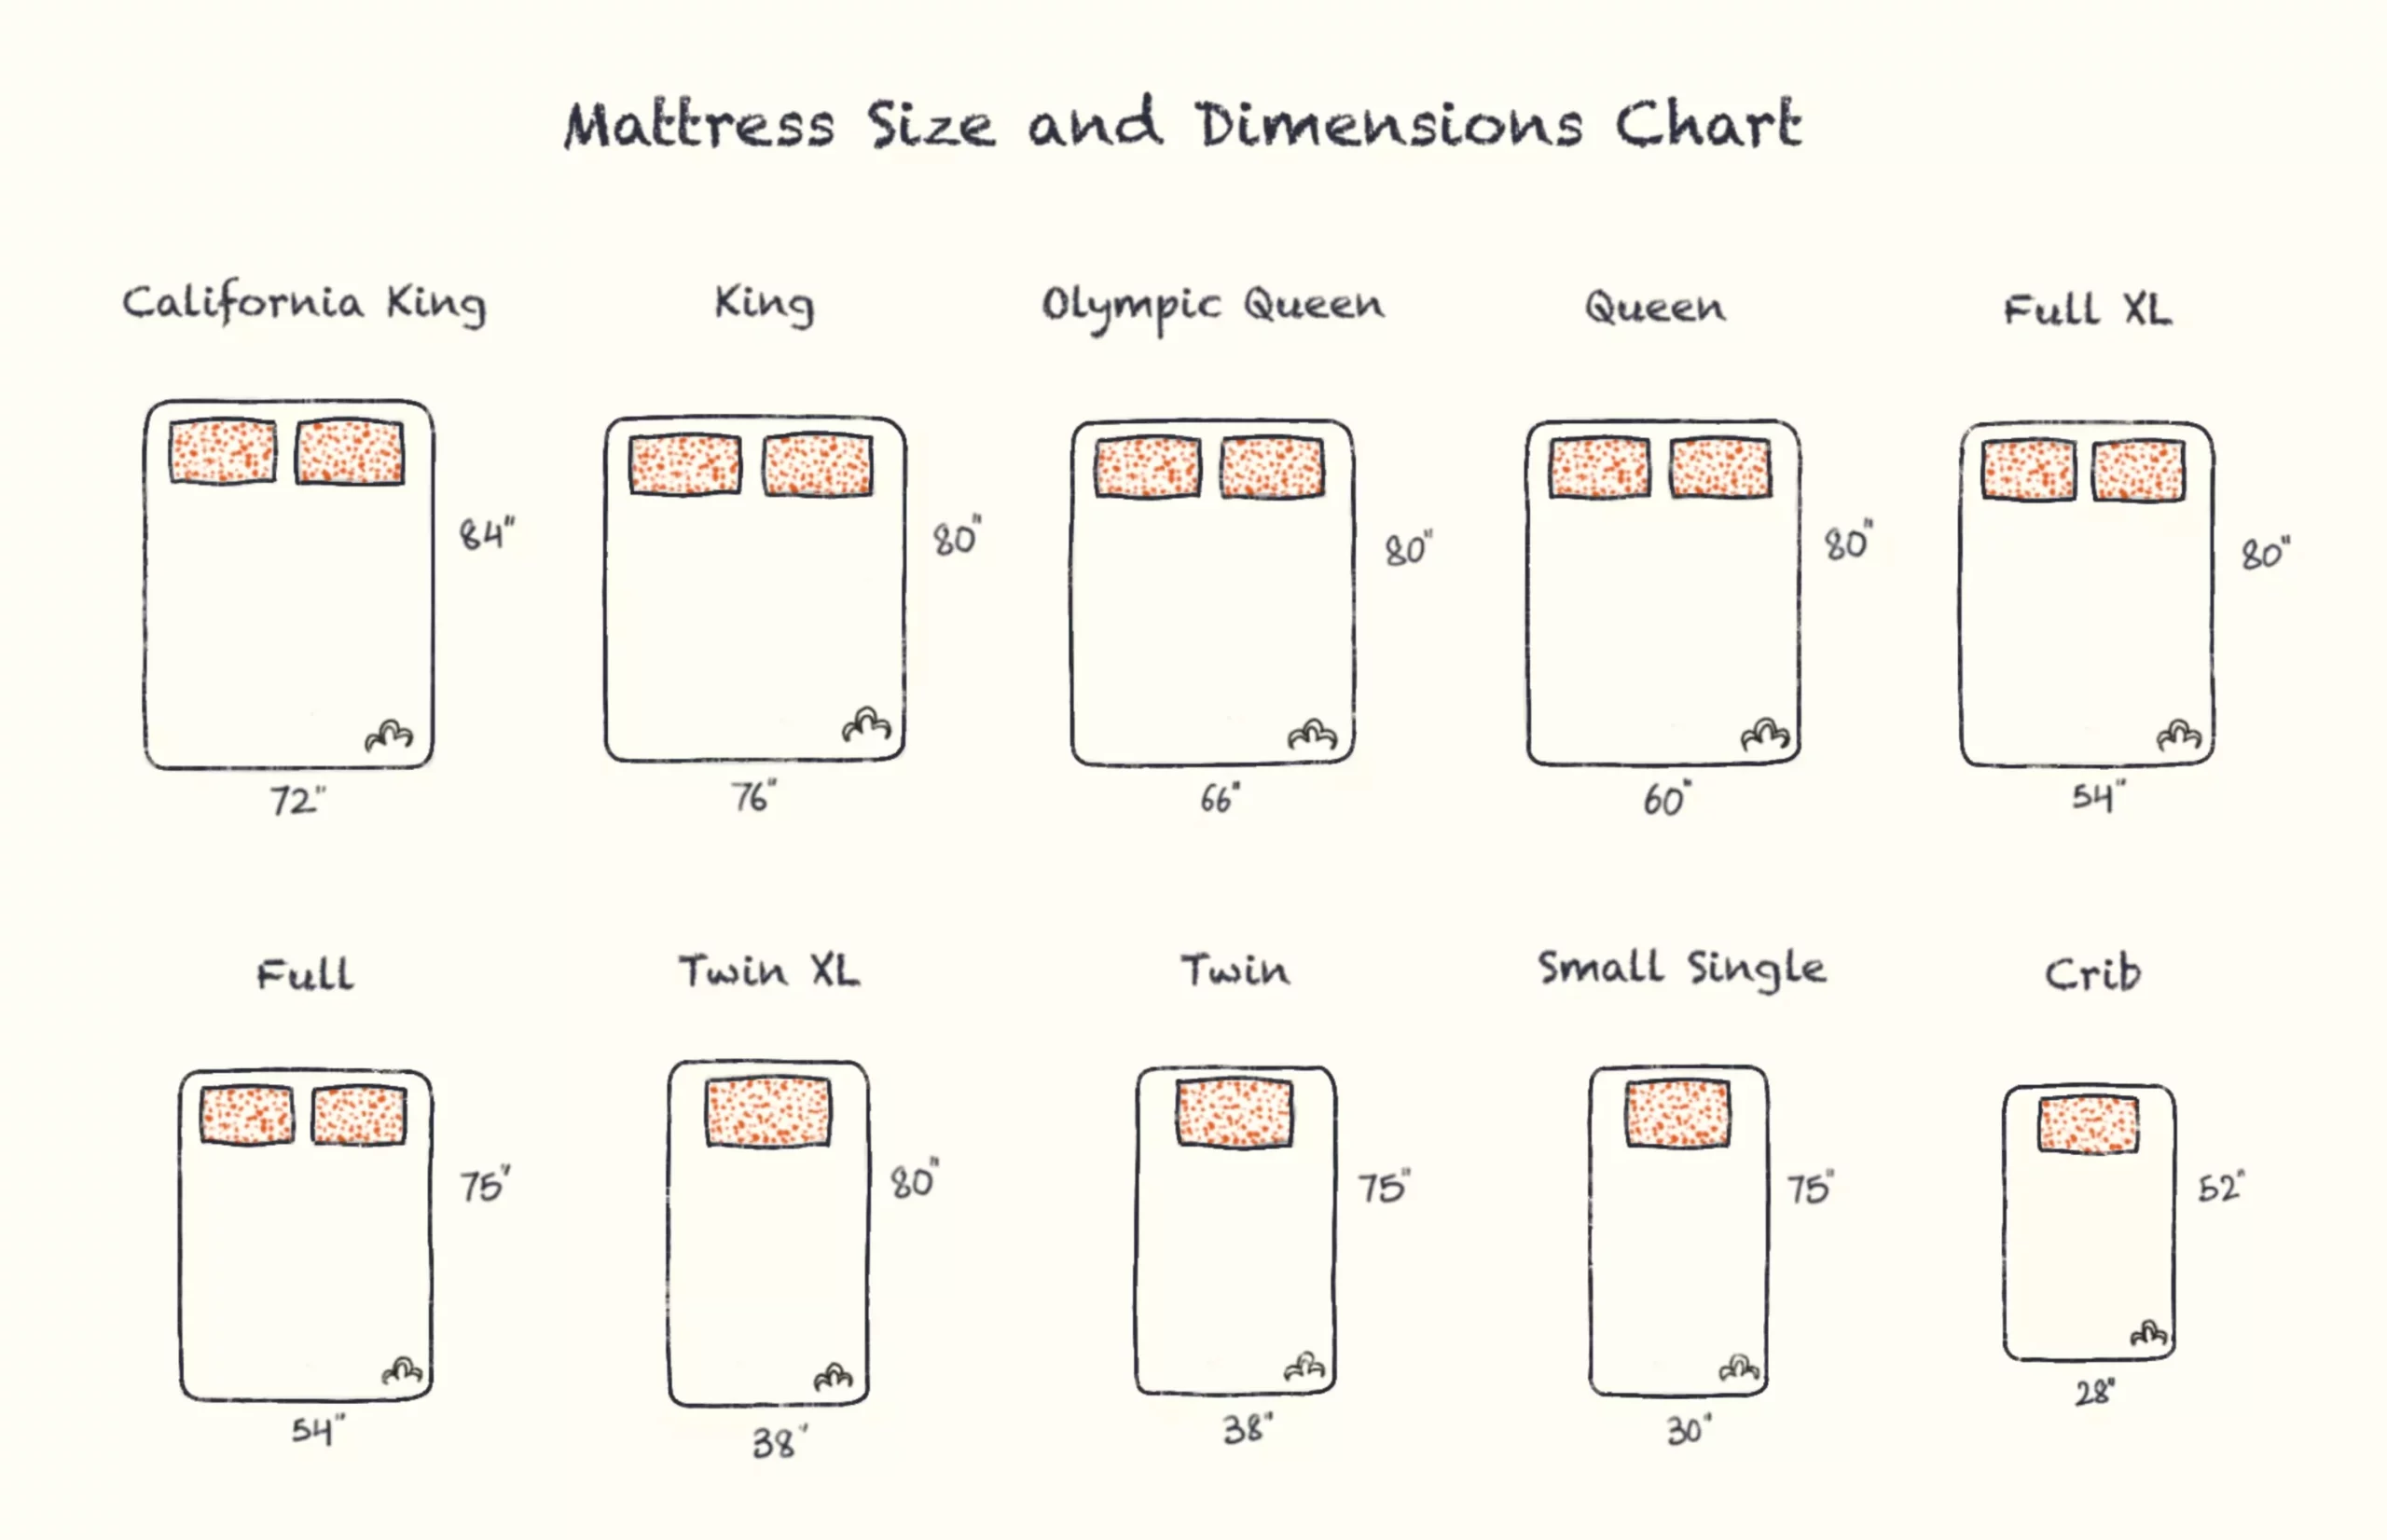 Illustration of Mattress Foundation Sizes and Dimensions